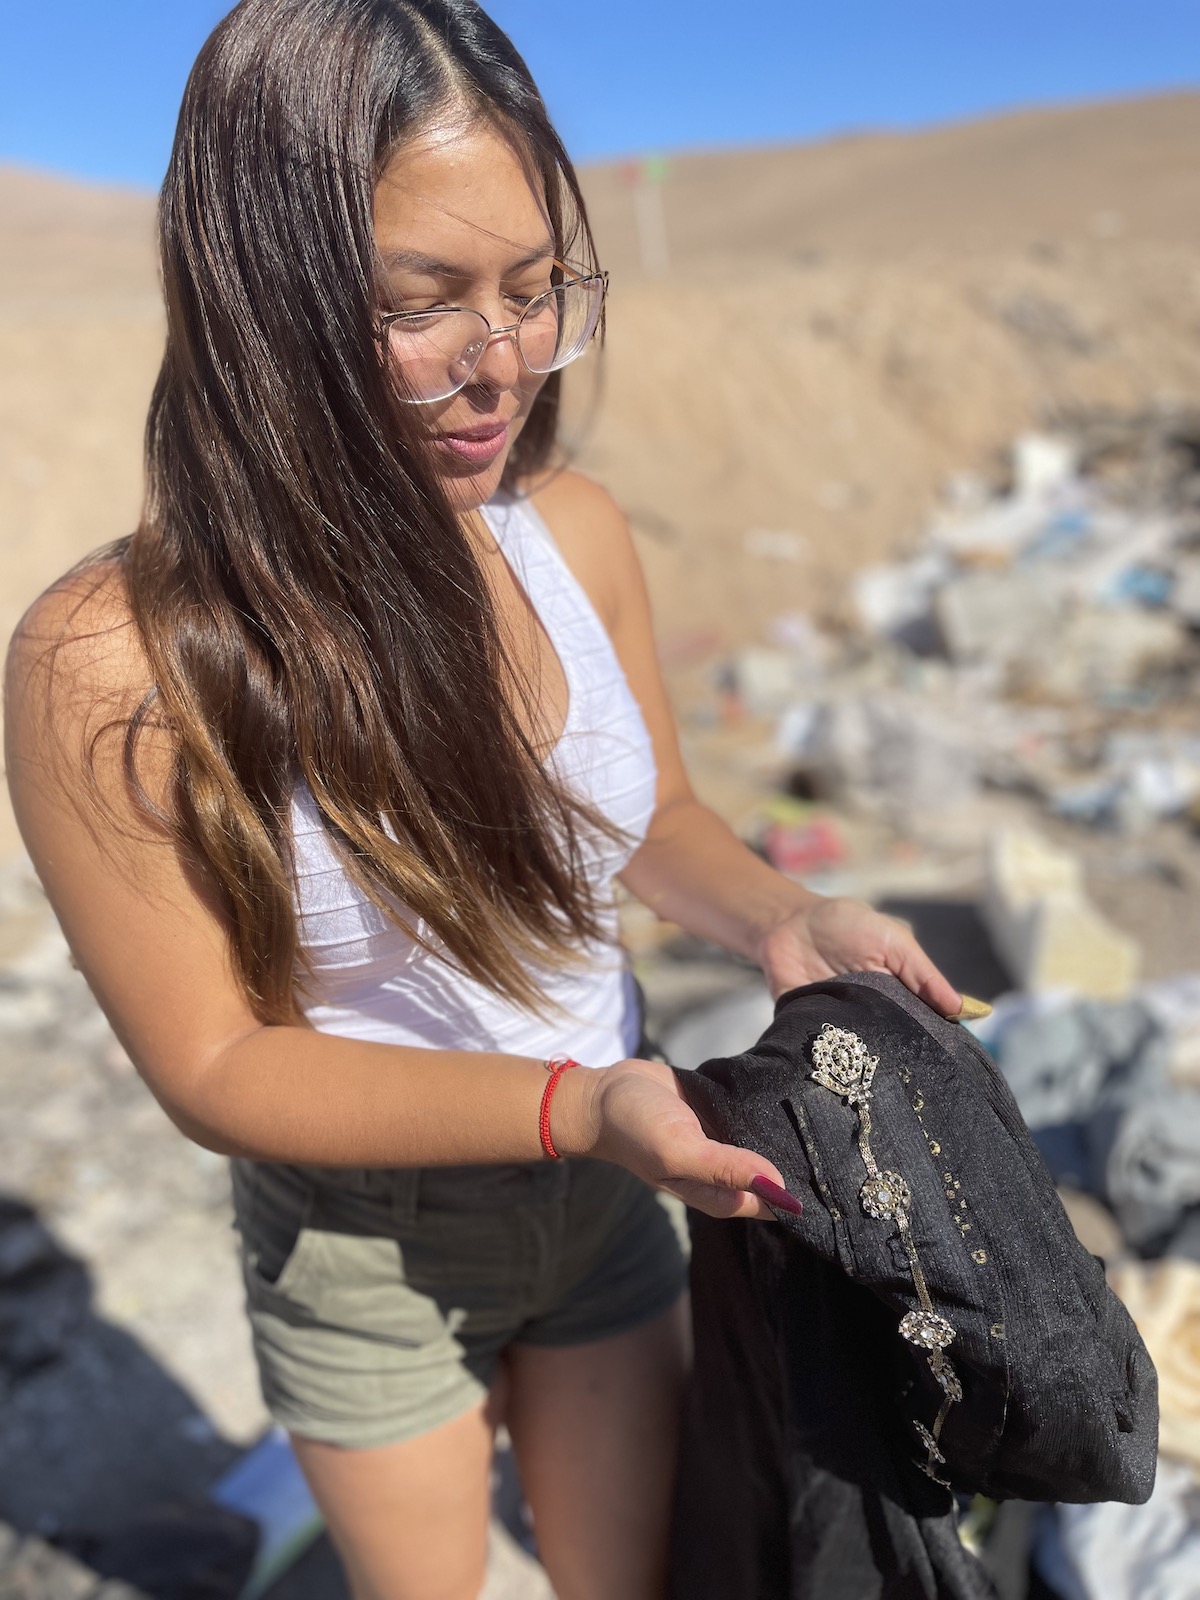 a young woman holds a black piece of clothing with embroidery near a large pile of textile trash in the desert